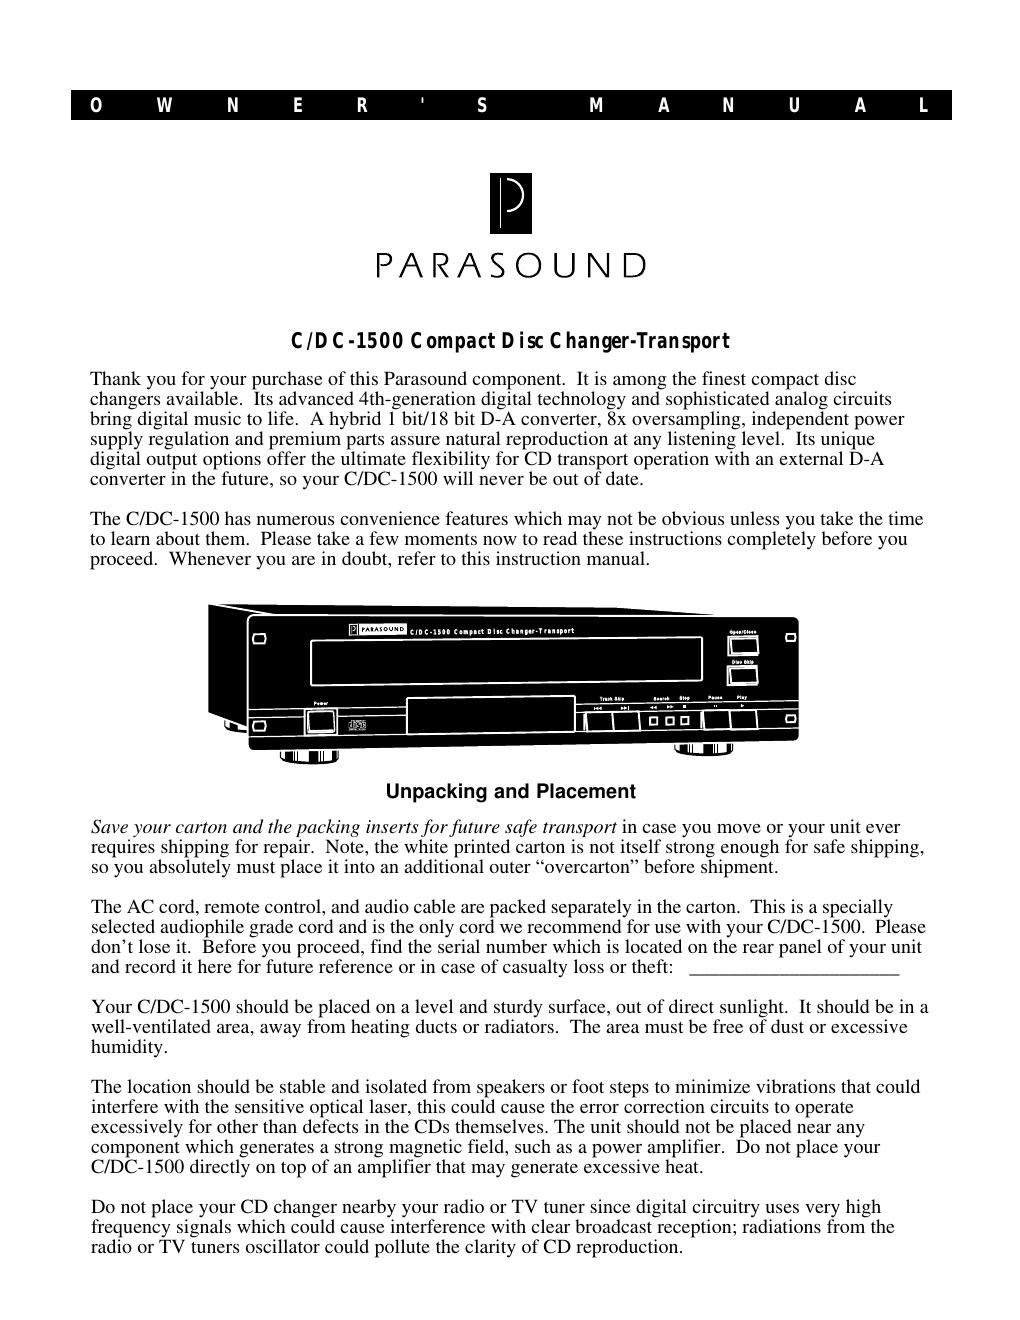 parasound cdc 1500 owners manual